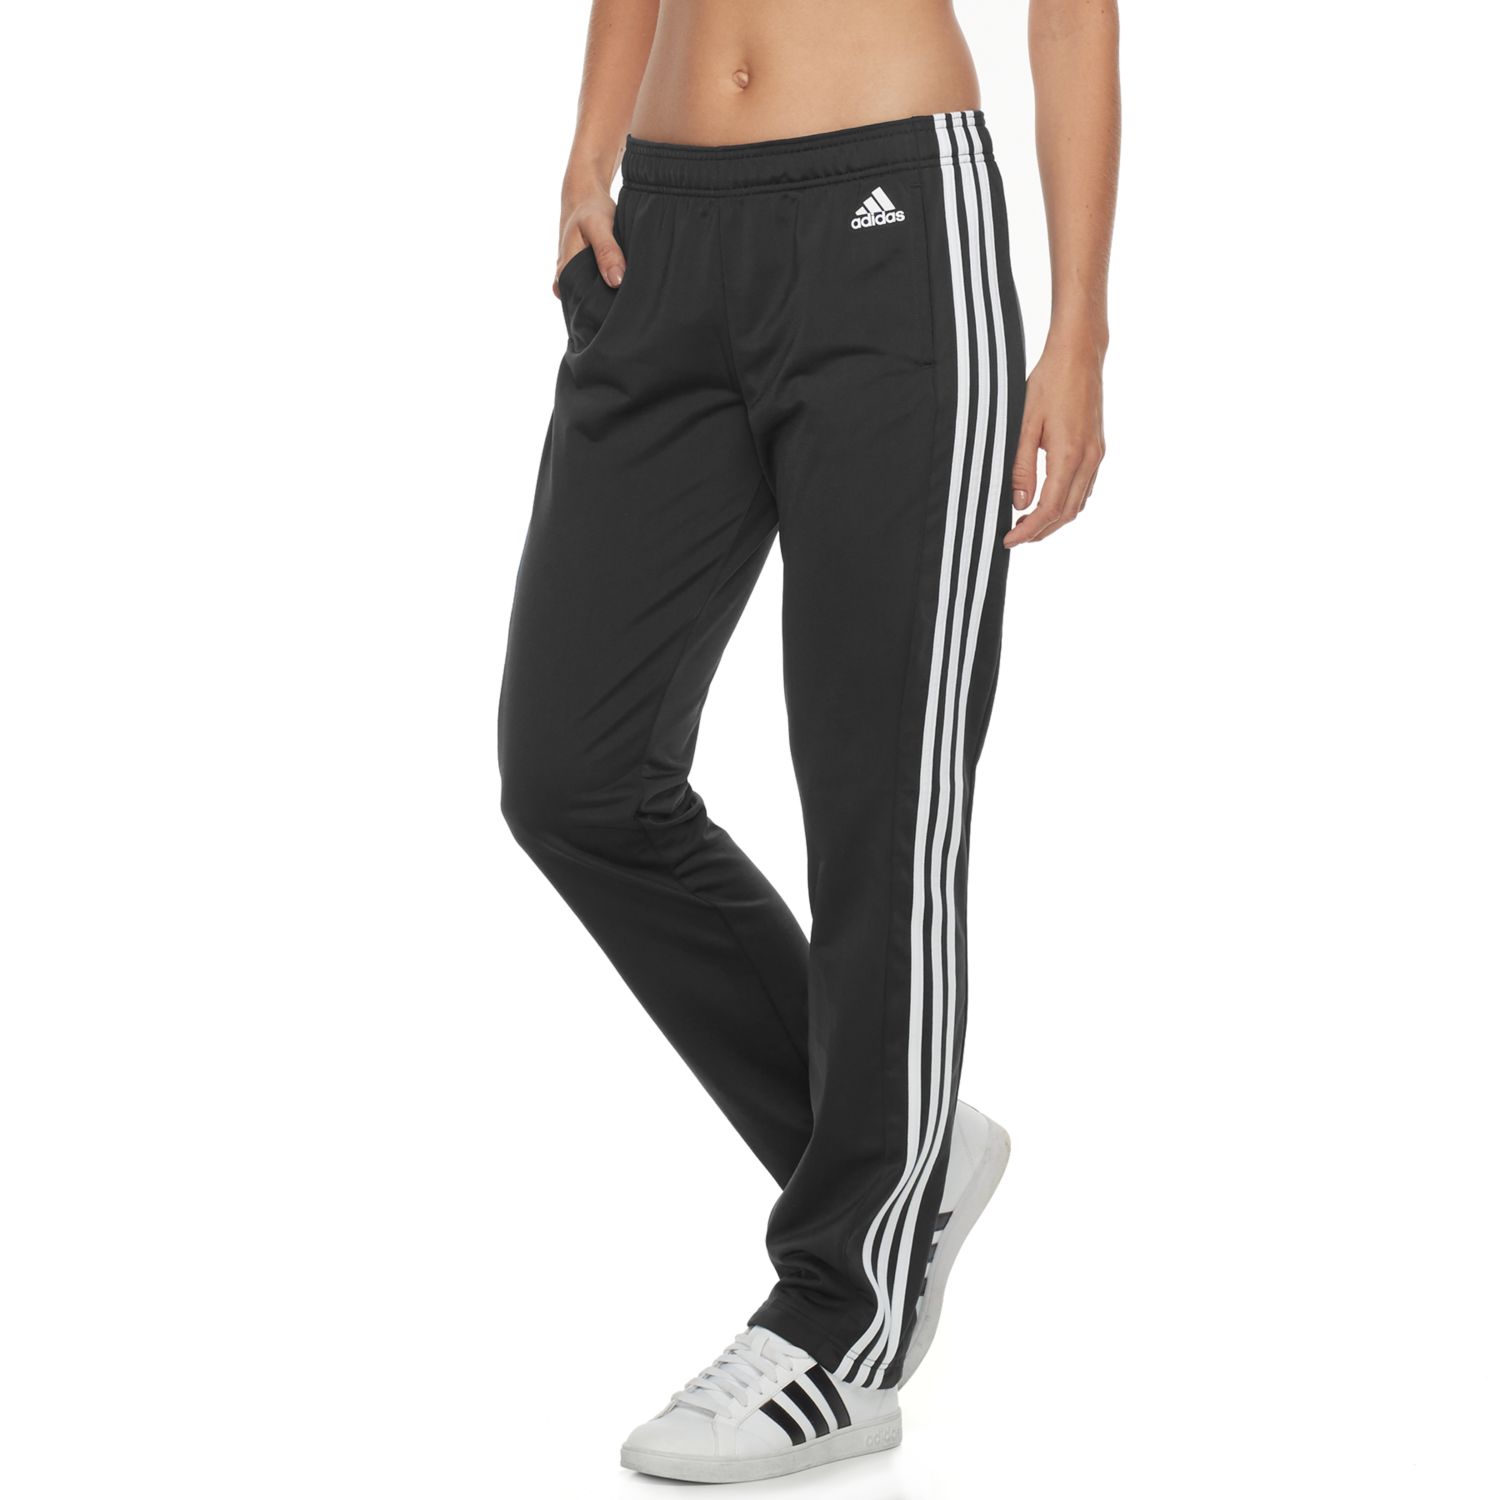 adidas women's designed to move pants